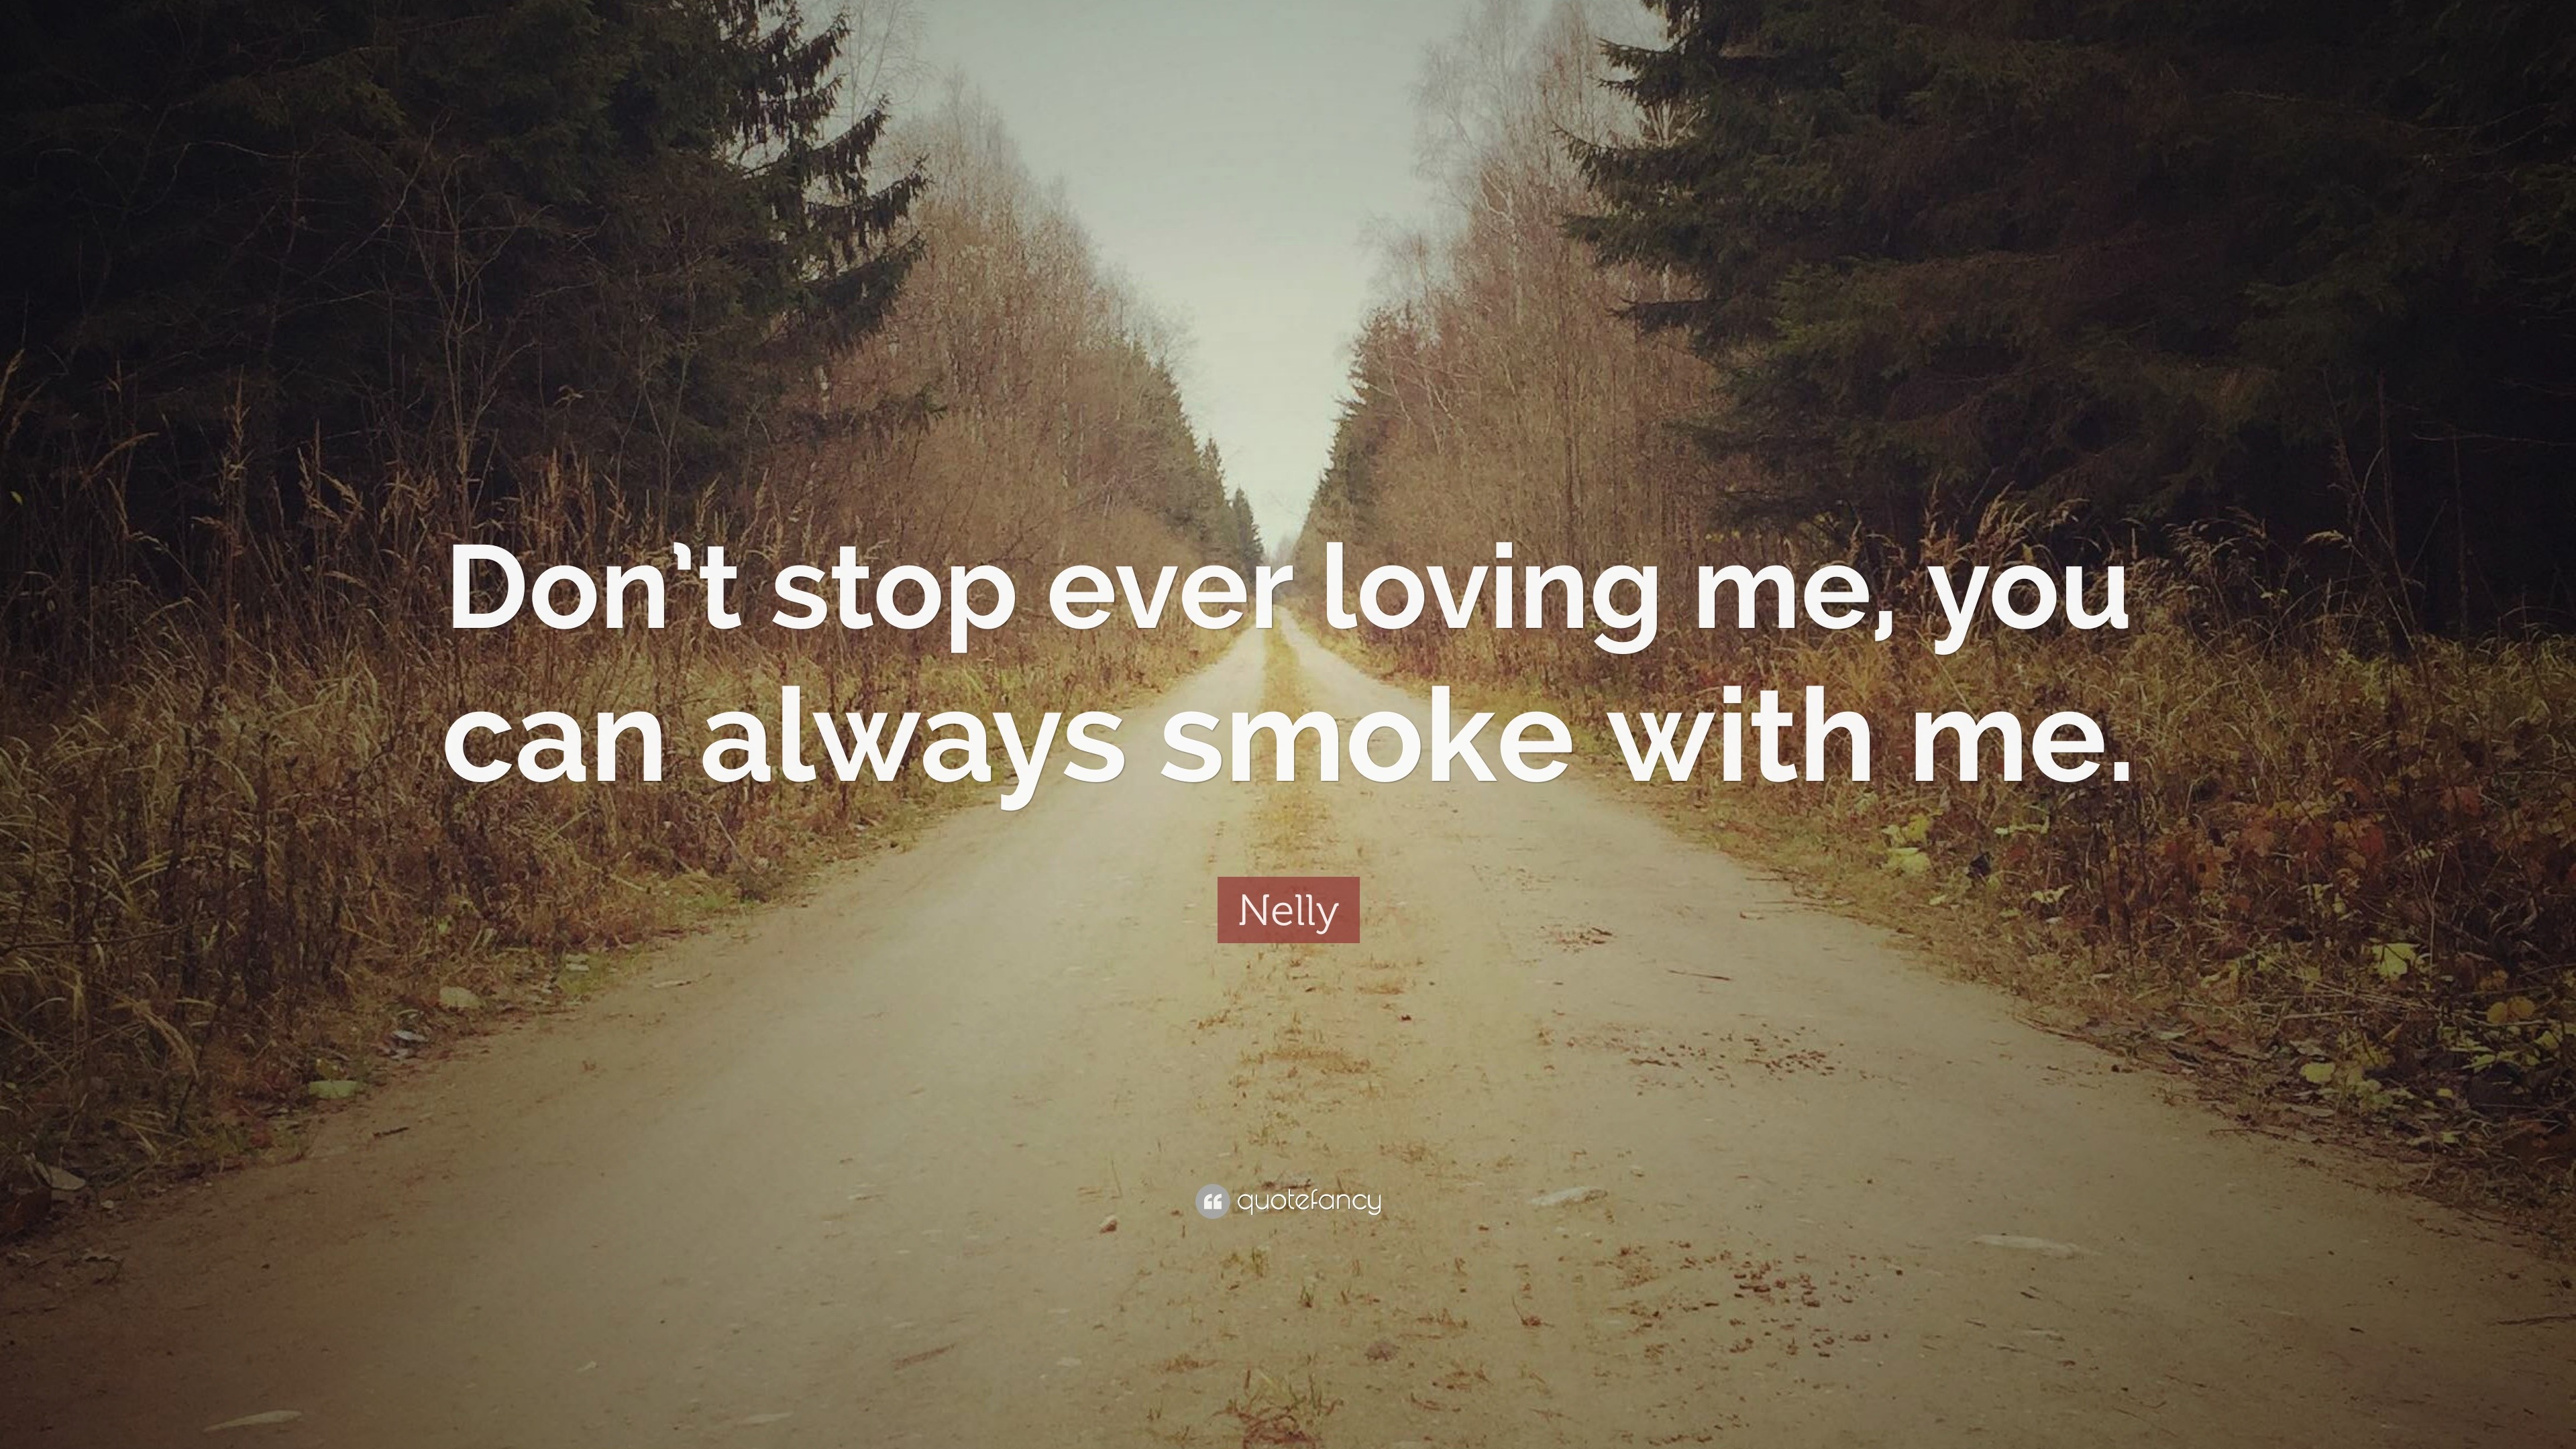 Nelly Quote “Don t stop ever loving me you can always smoke